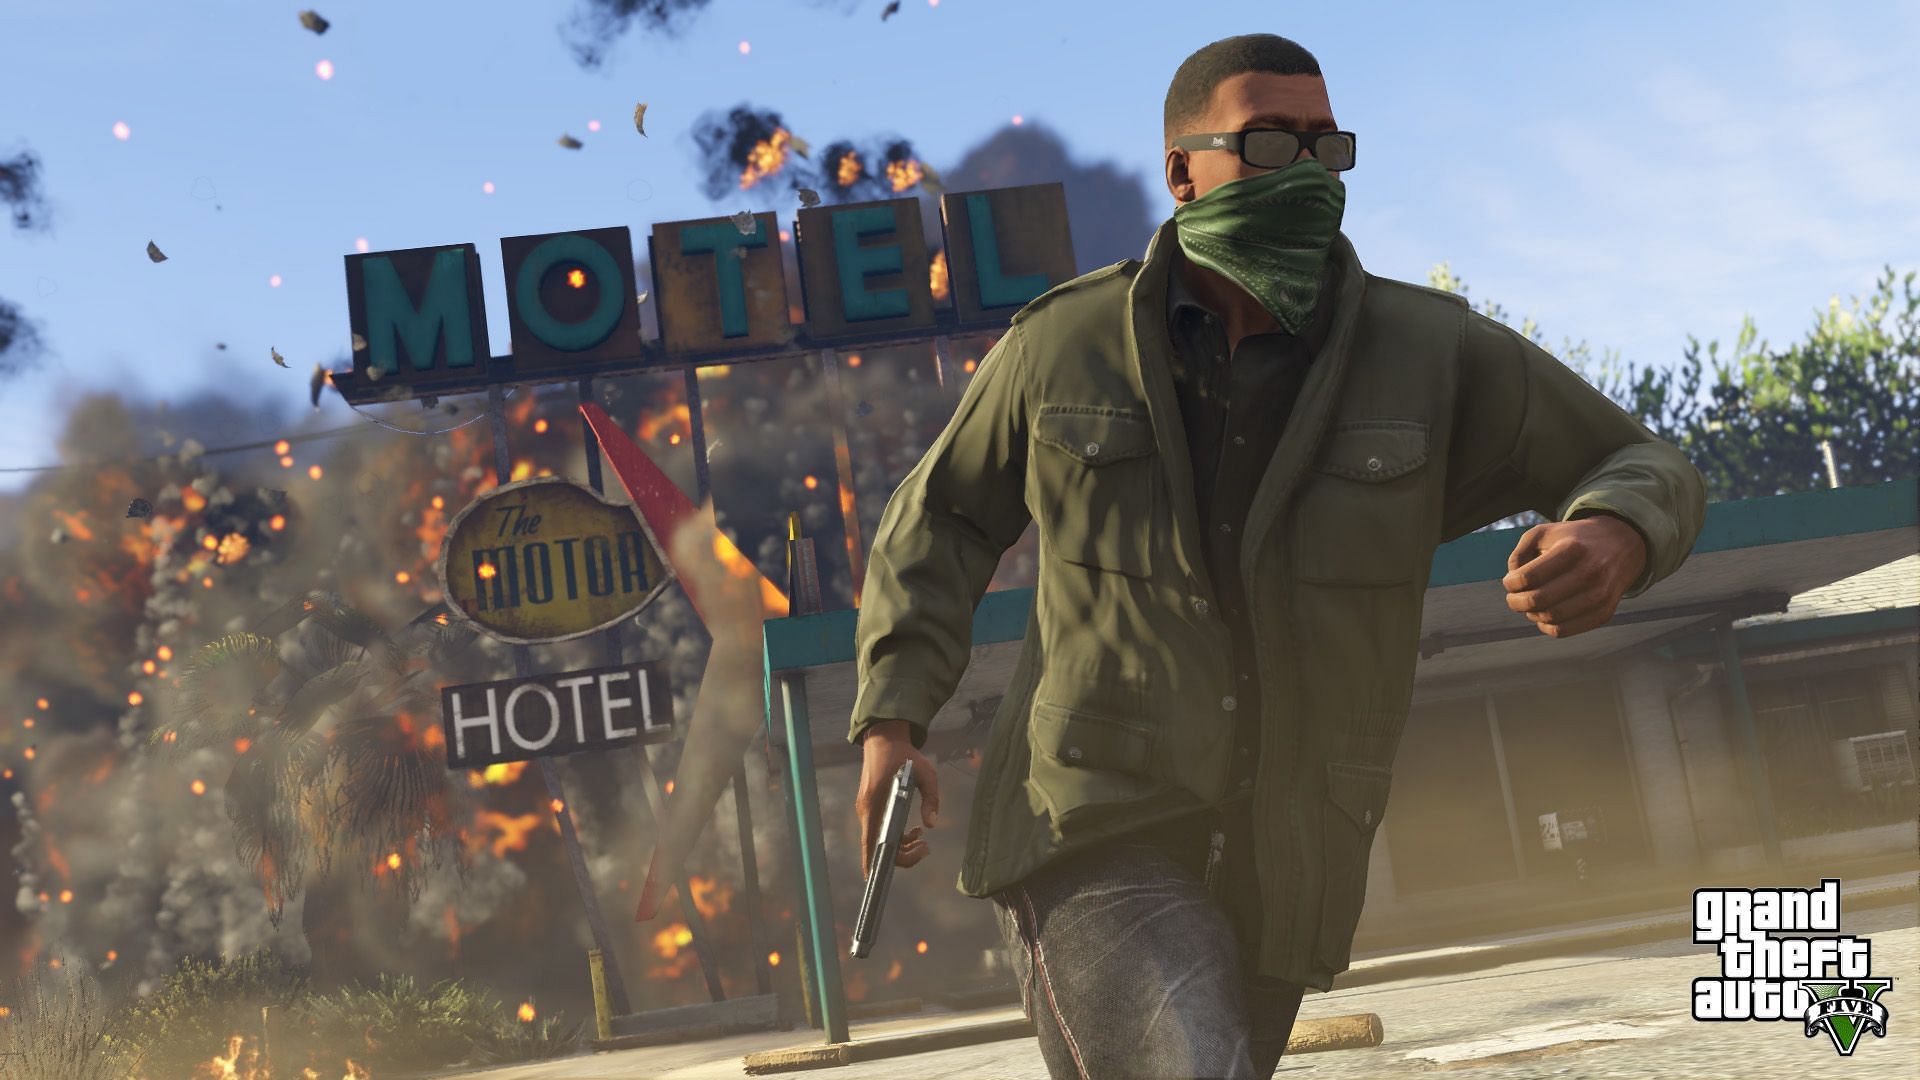 Insiders believe support for GTA Online on PS4 will end soon (Image via Rockstar Games)